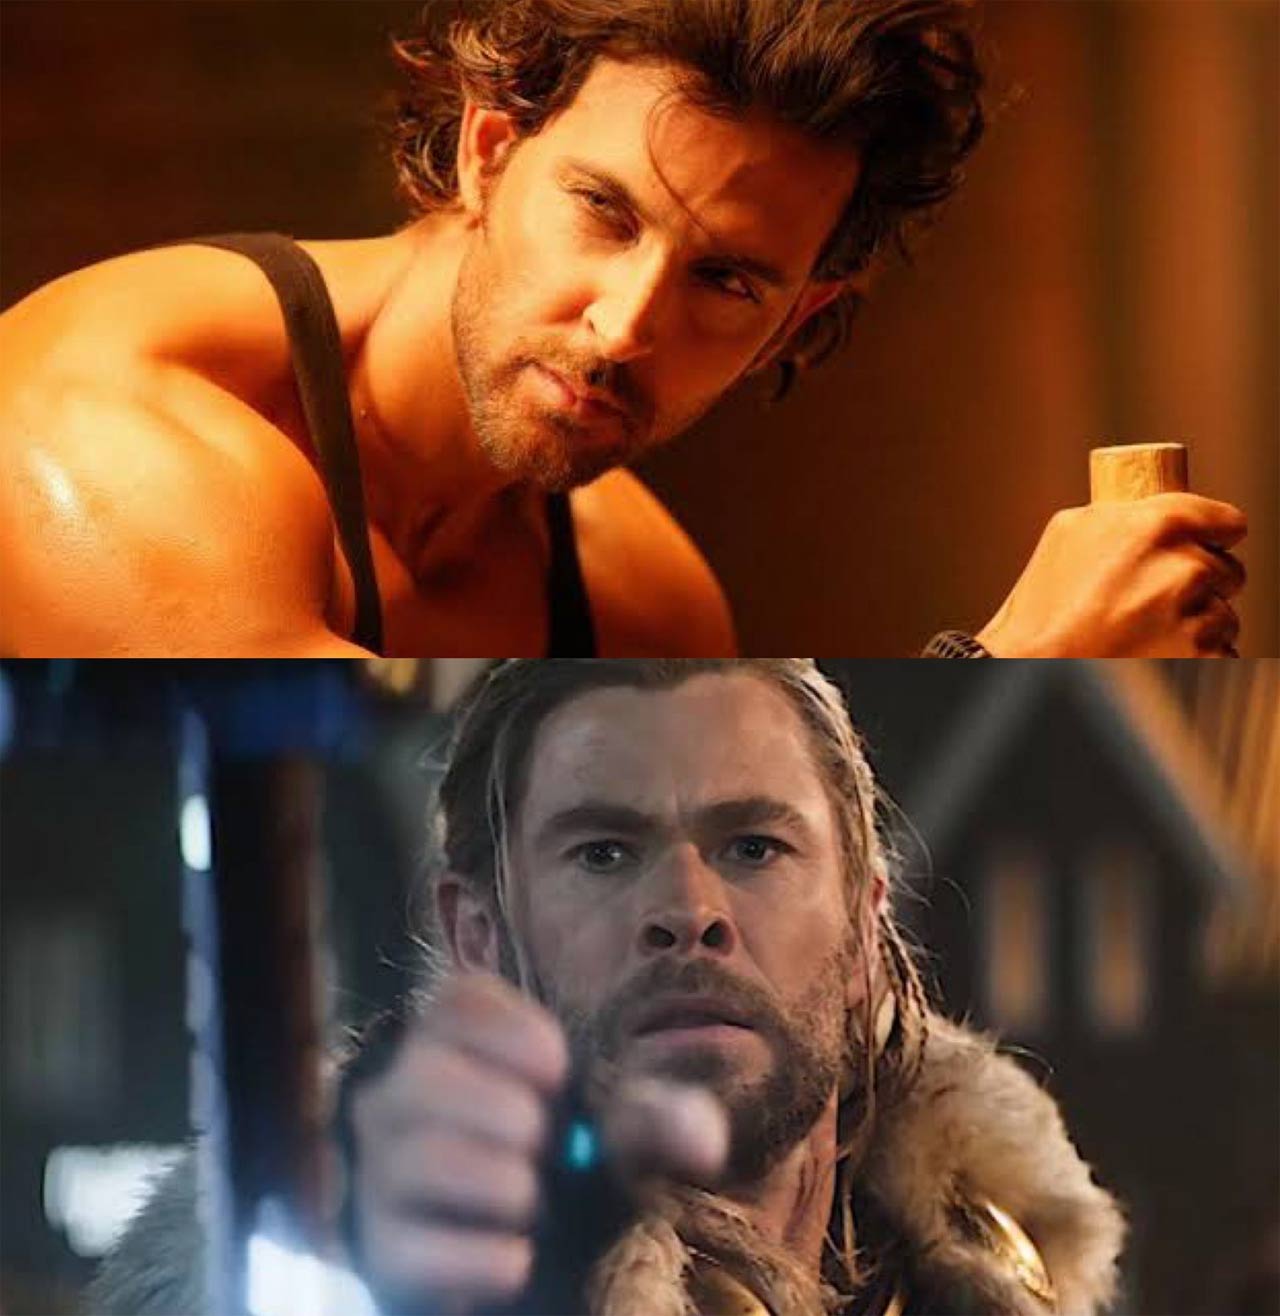 One could cast Hrithik Roshan as Thor. Not only does he have the experience of playing a Superhero, he has the perfect charm, potential and on-screen presence to play the muscular Asgardian God. He has a chiseled body and knows how to excel in the genre of action